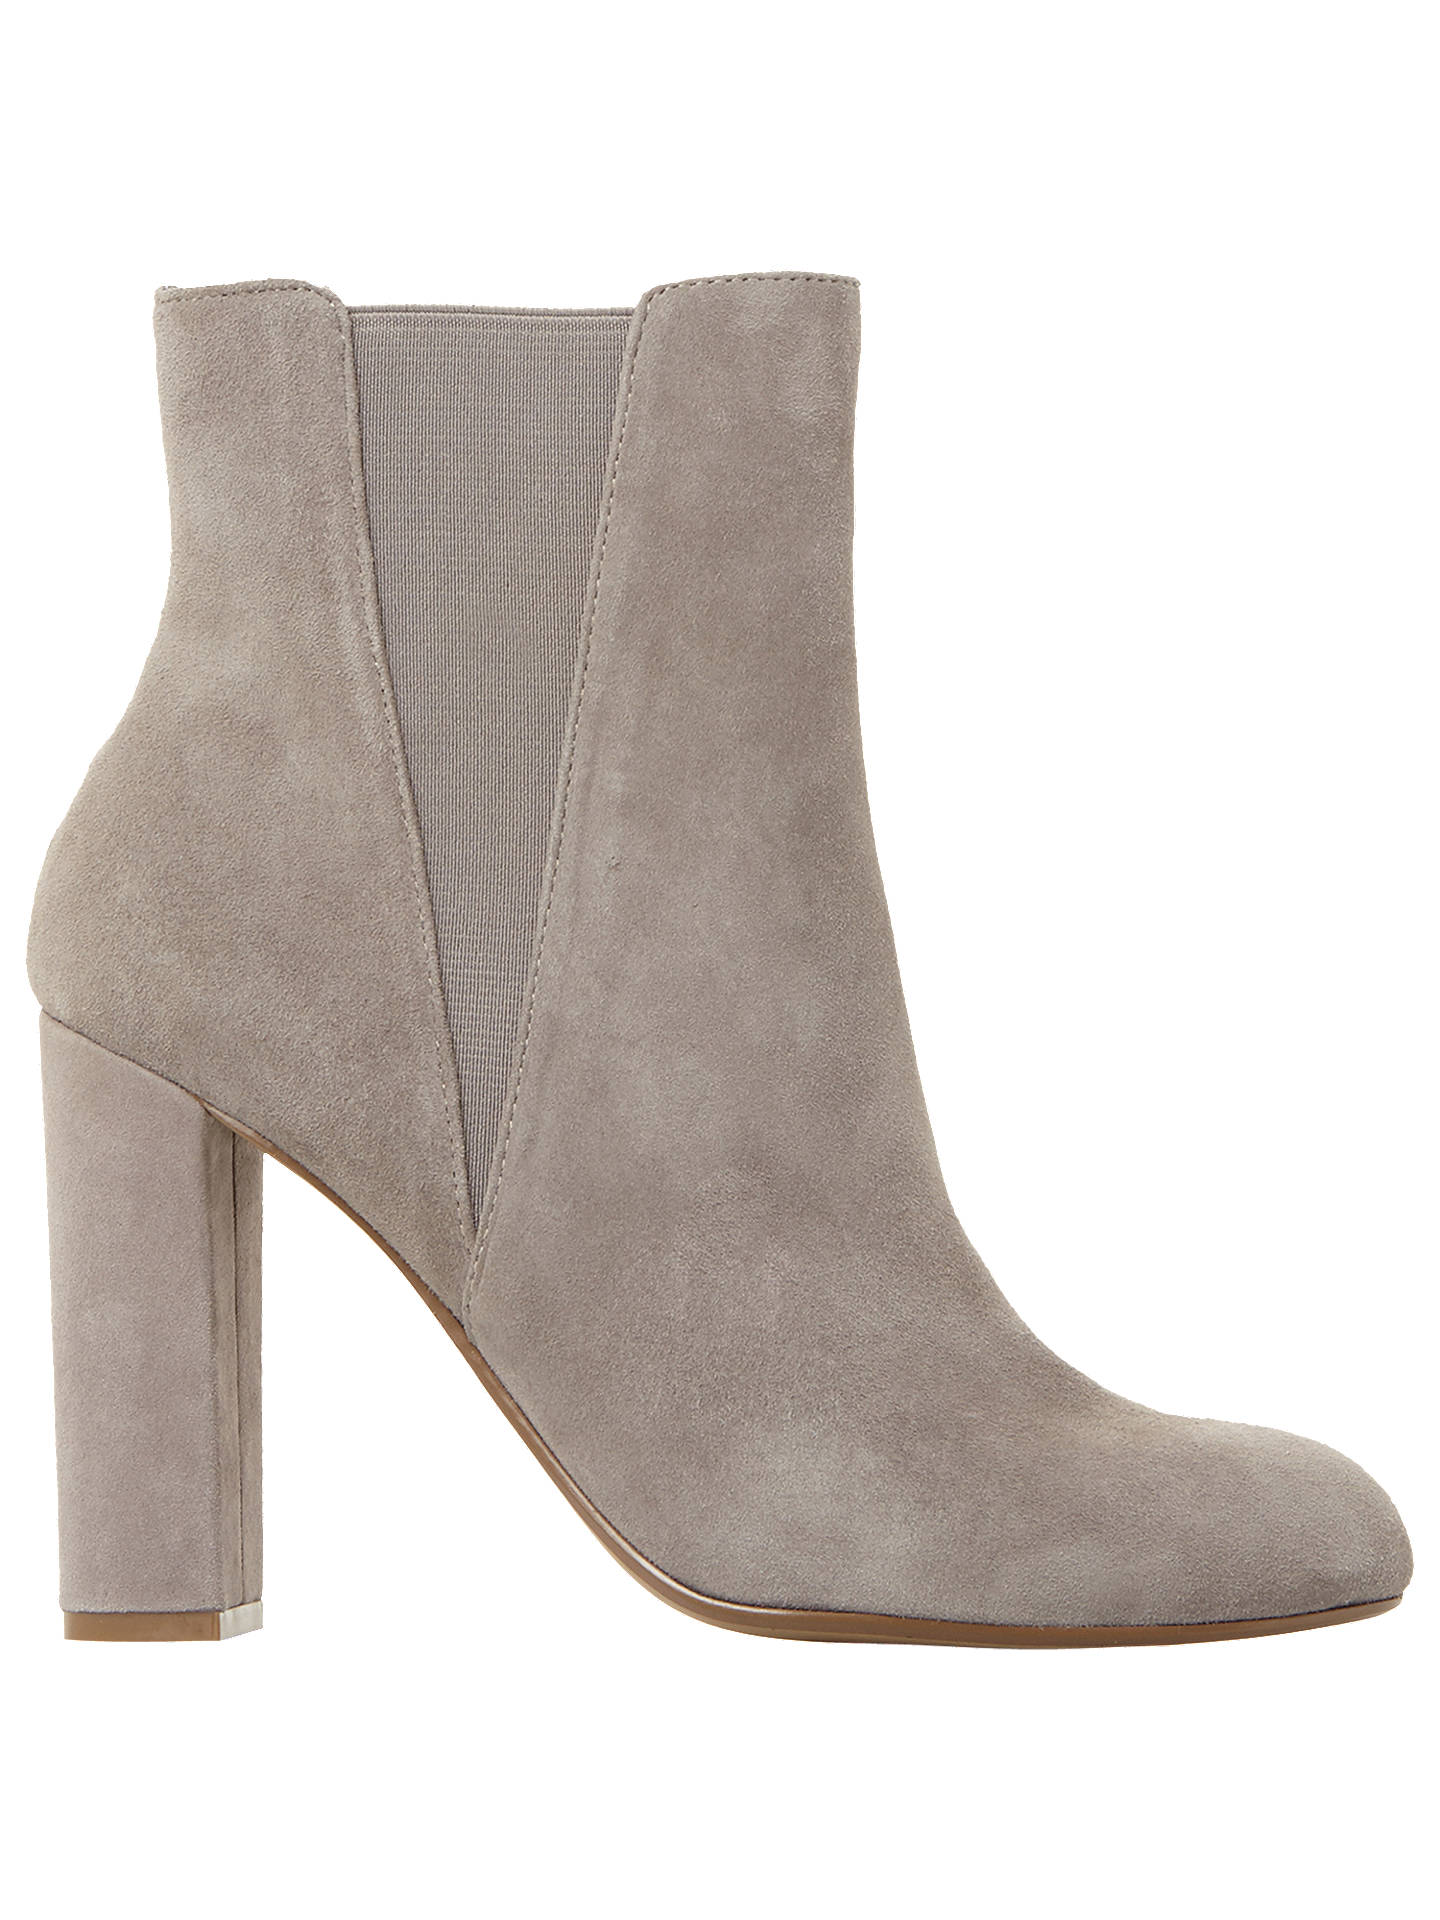 Steve Madden Effect Block Heeled Ankle Boots, Grey Suede at John Lewis ...